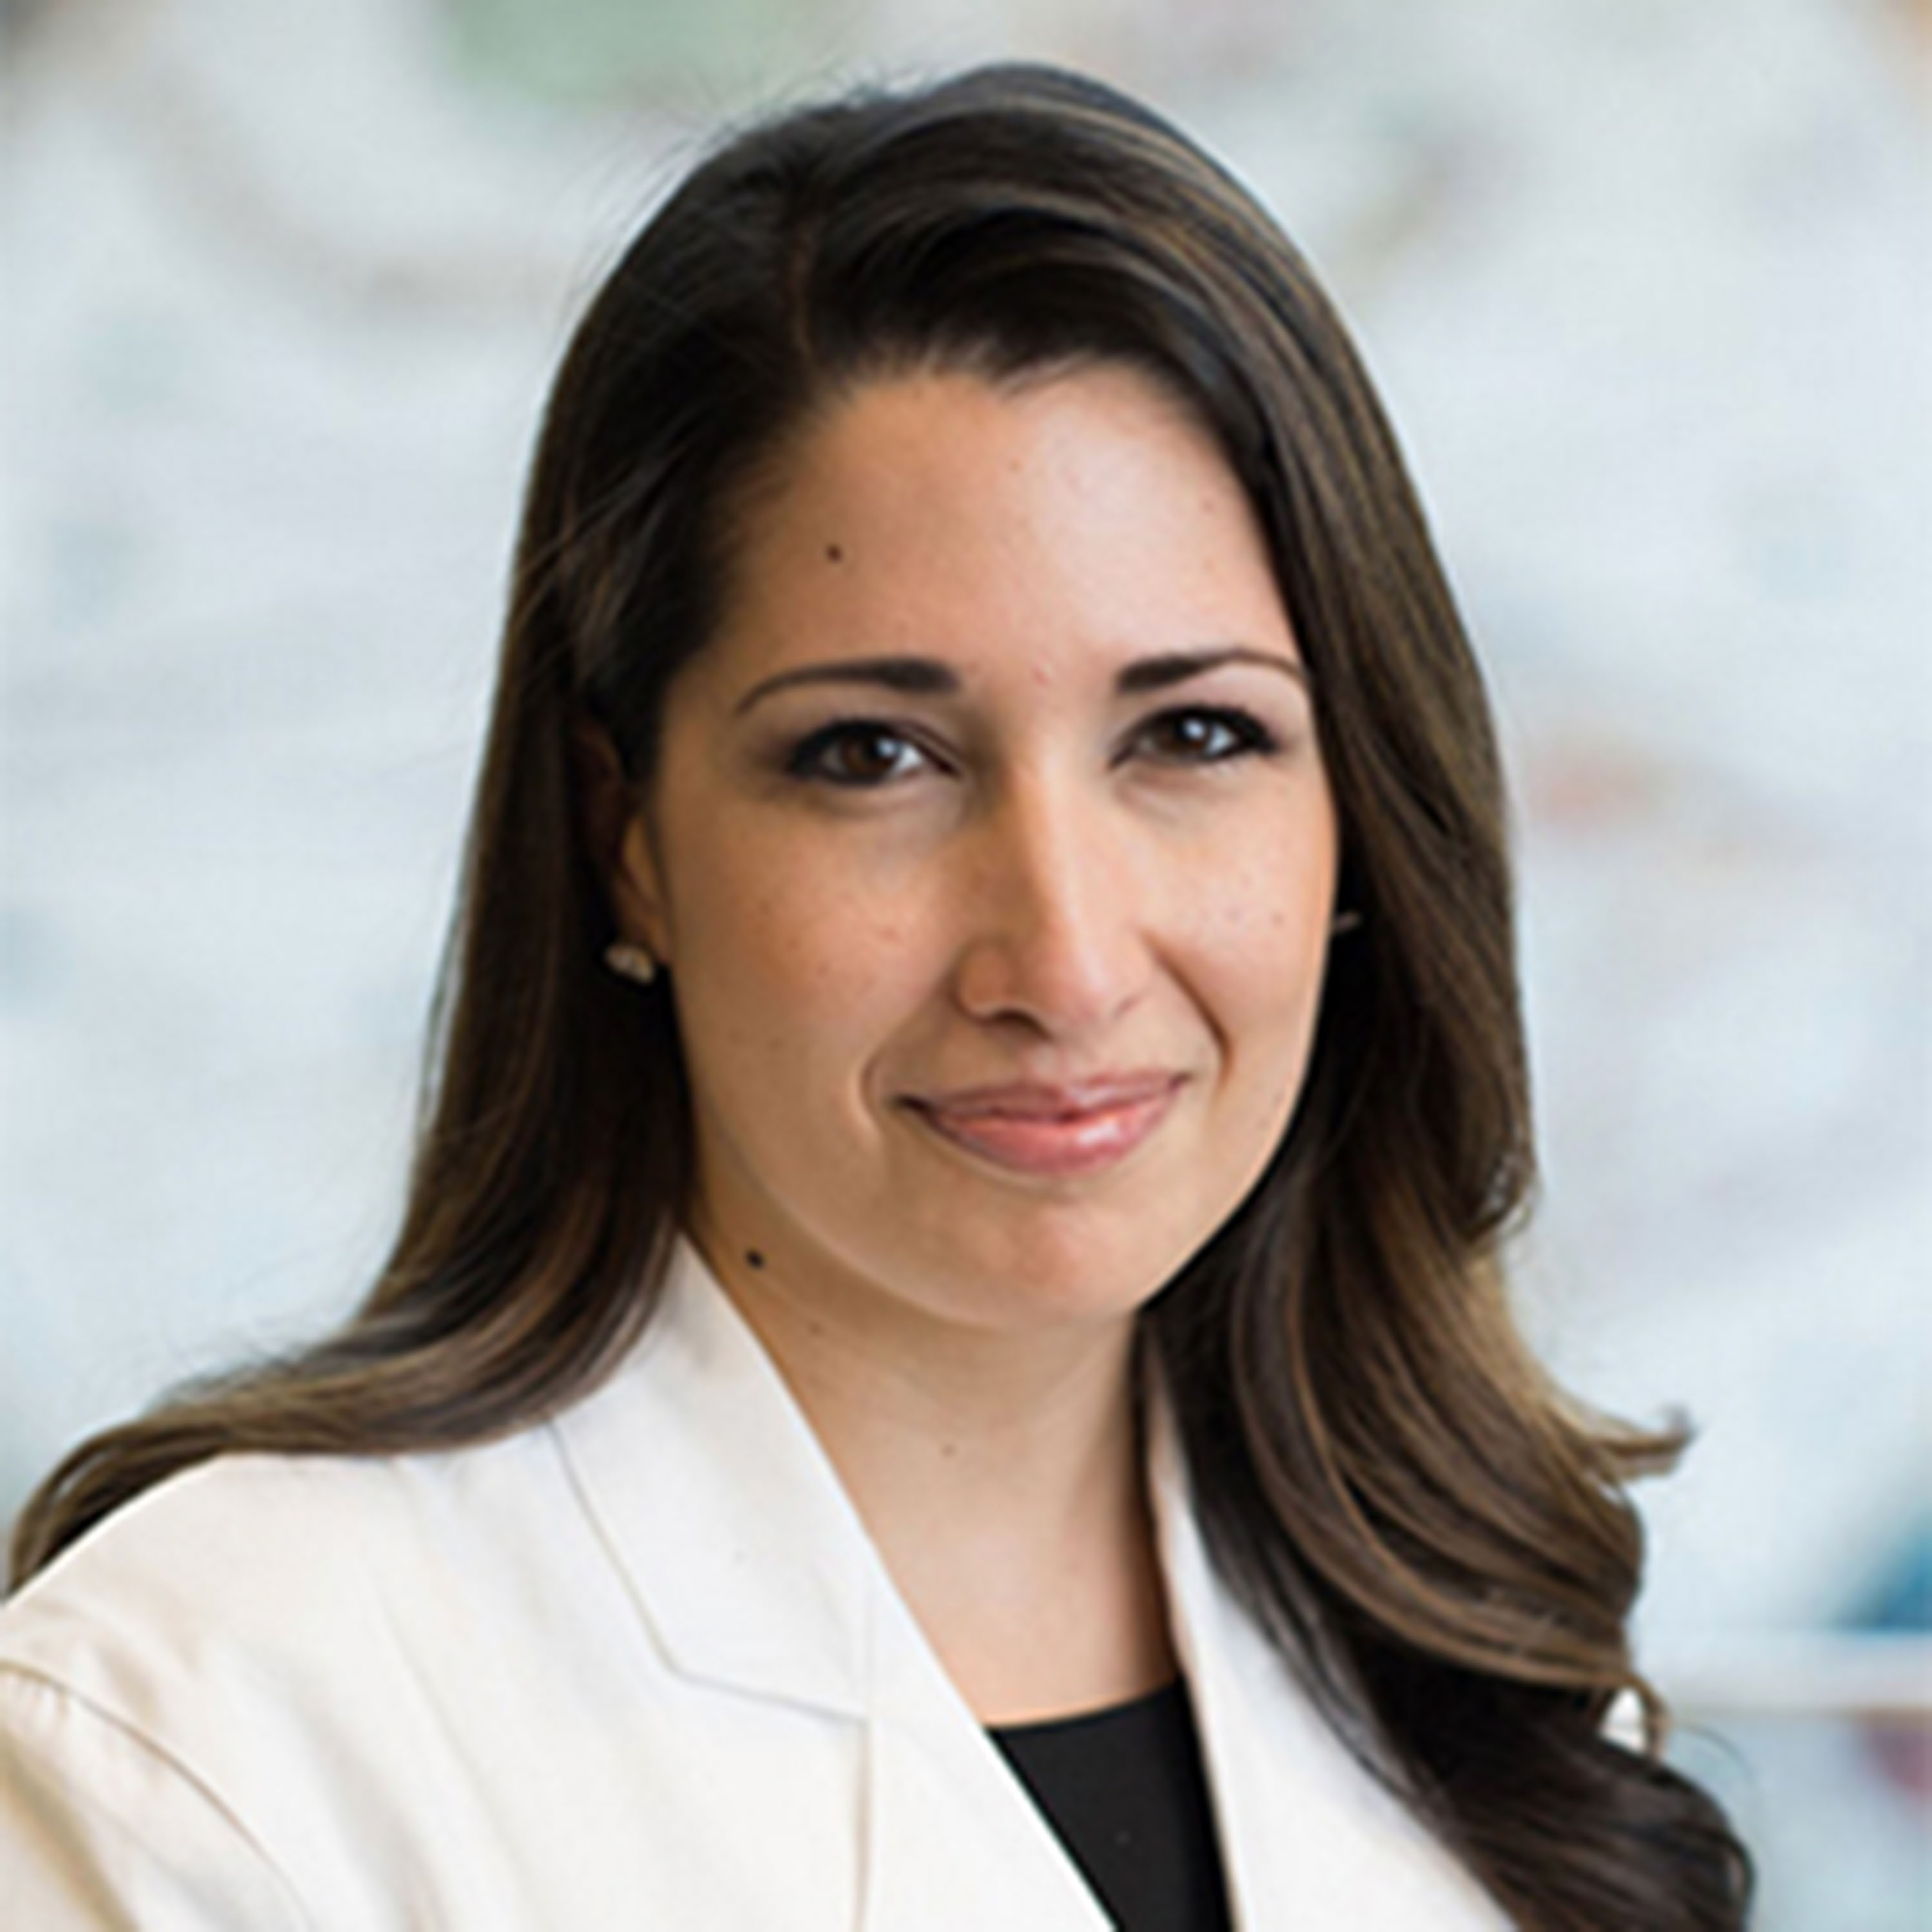 Dr. Deborah Farr Promoted to Section Head of Breast Surgery